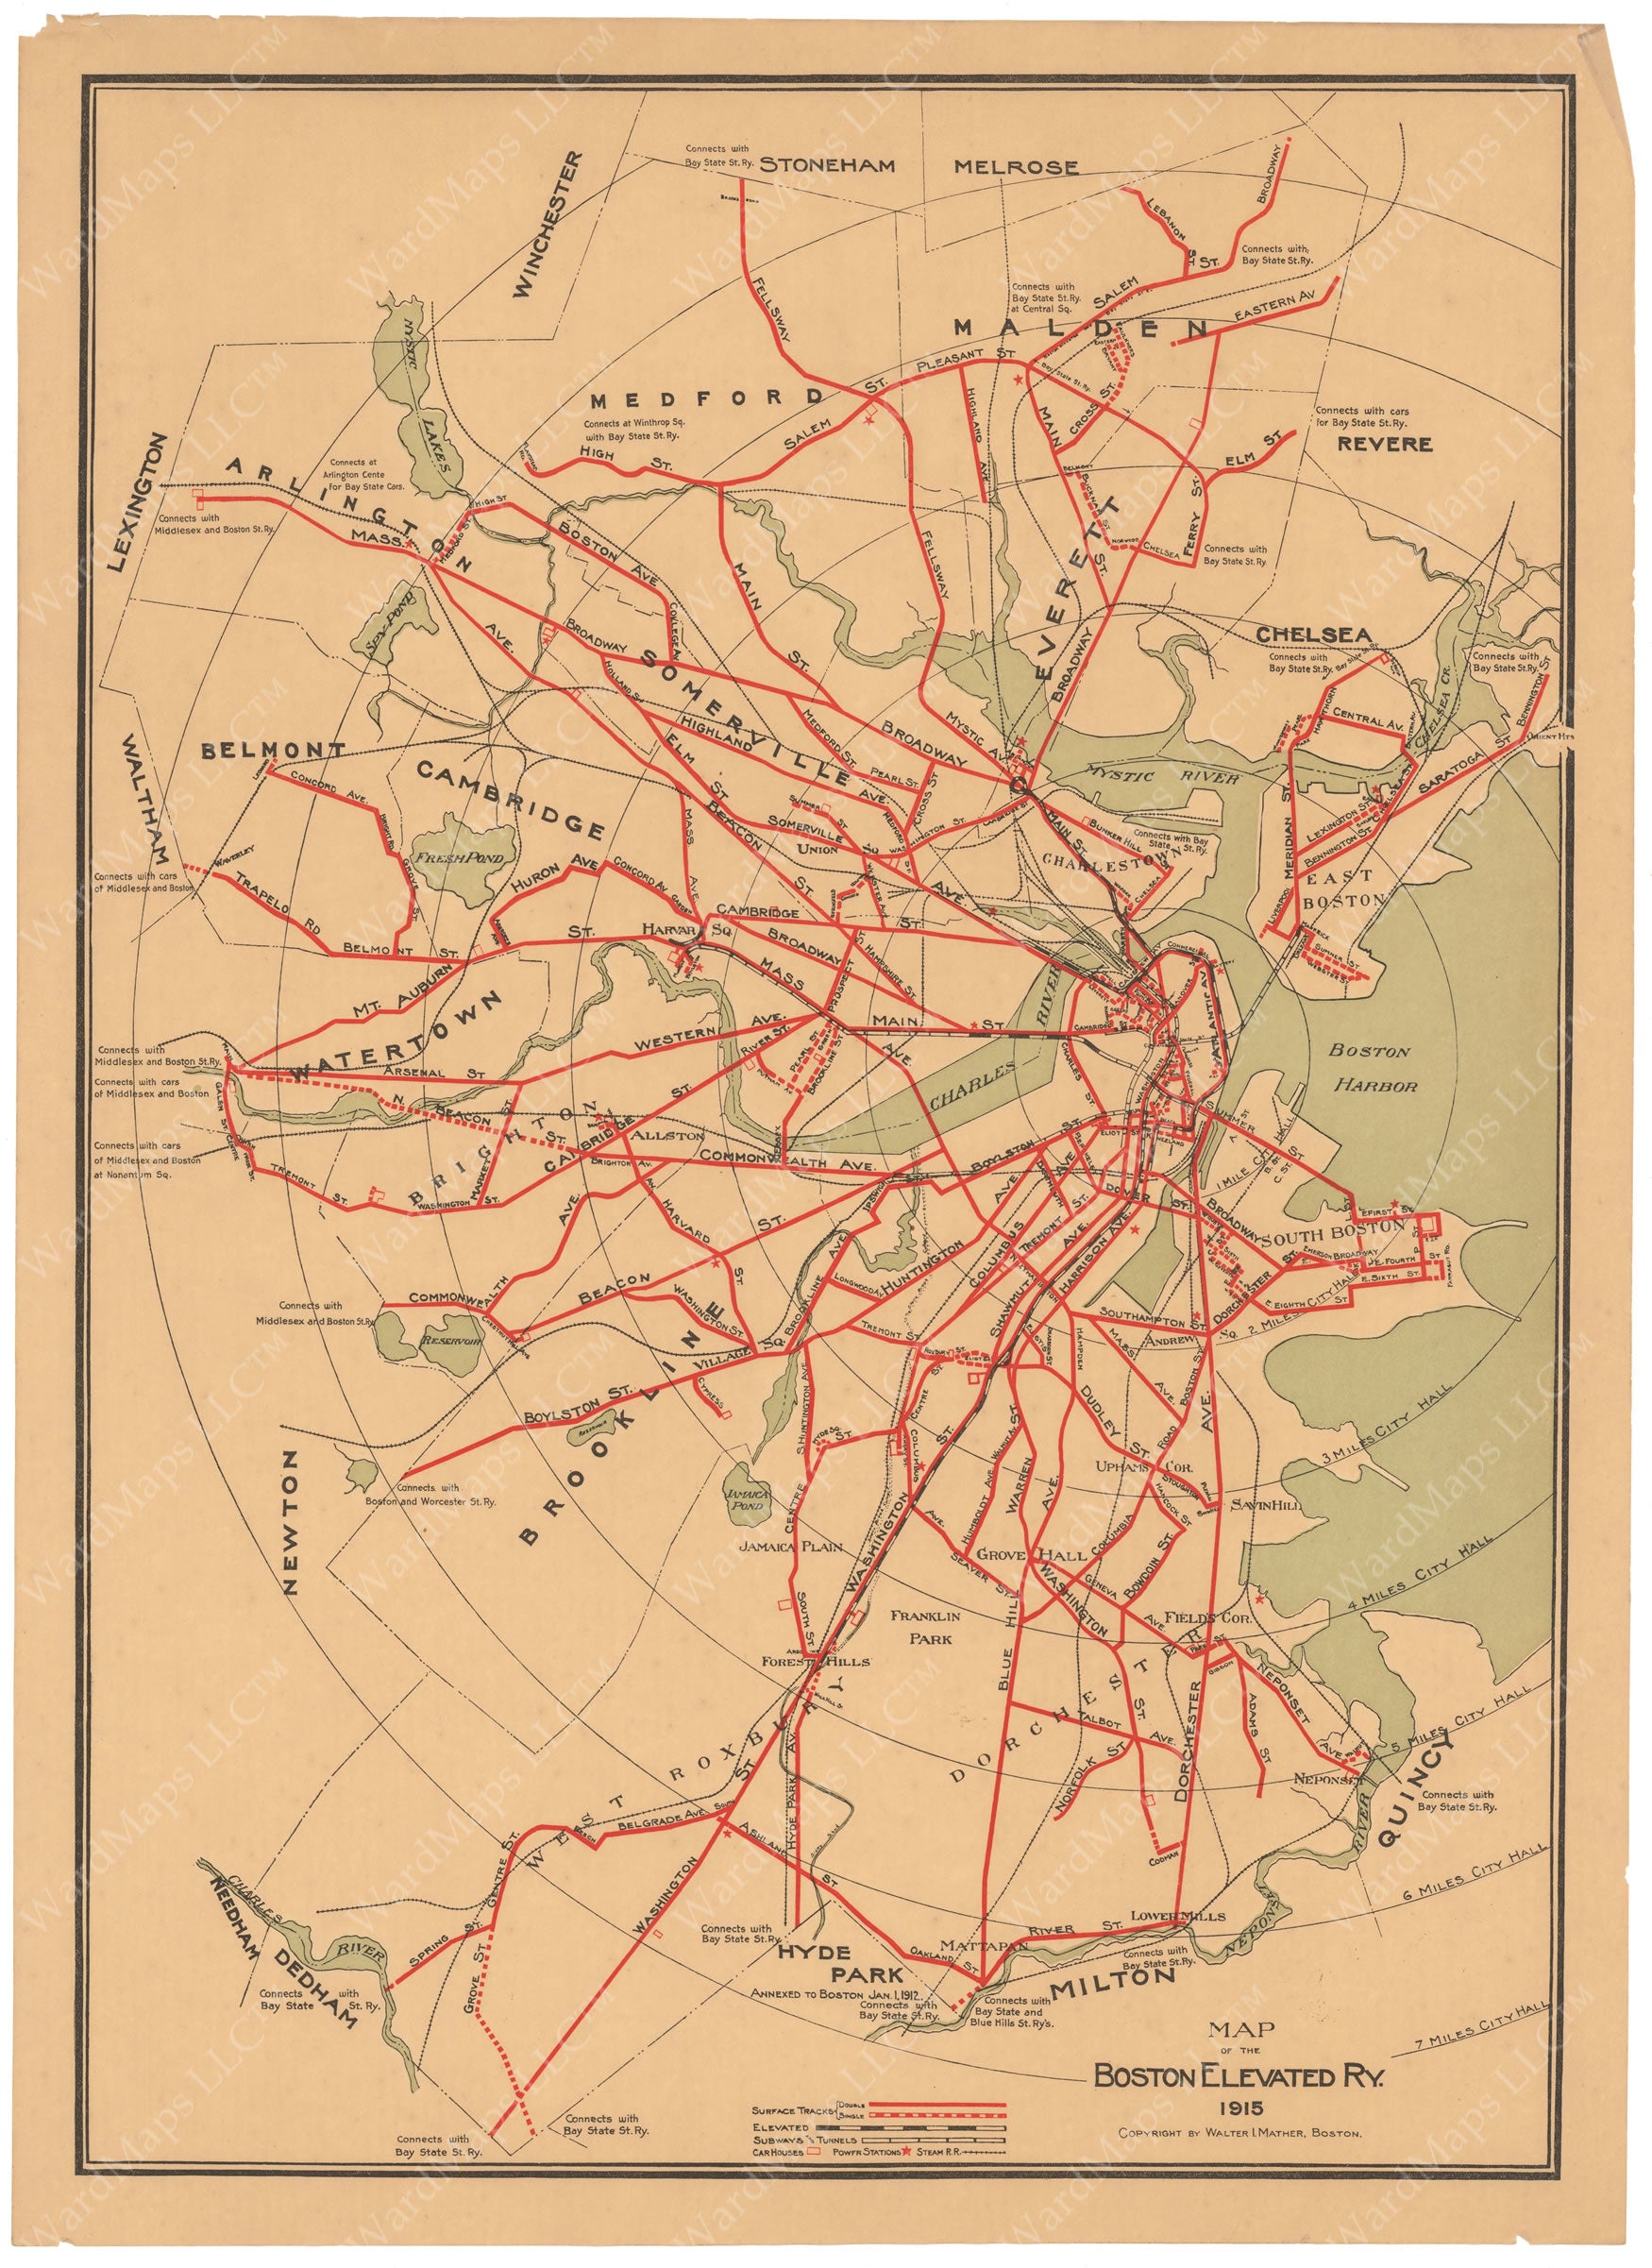 1915 Boston Elevated Railway Co. System Map